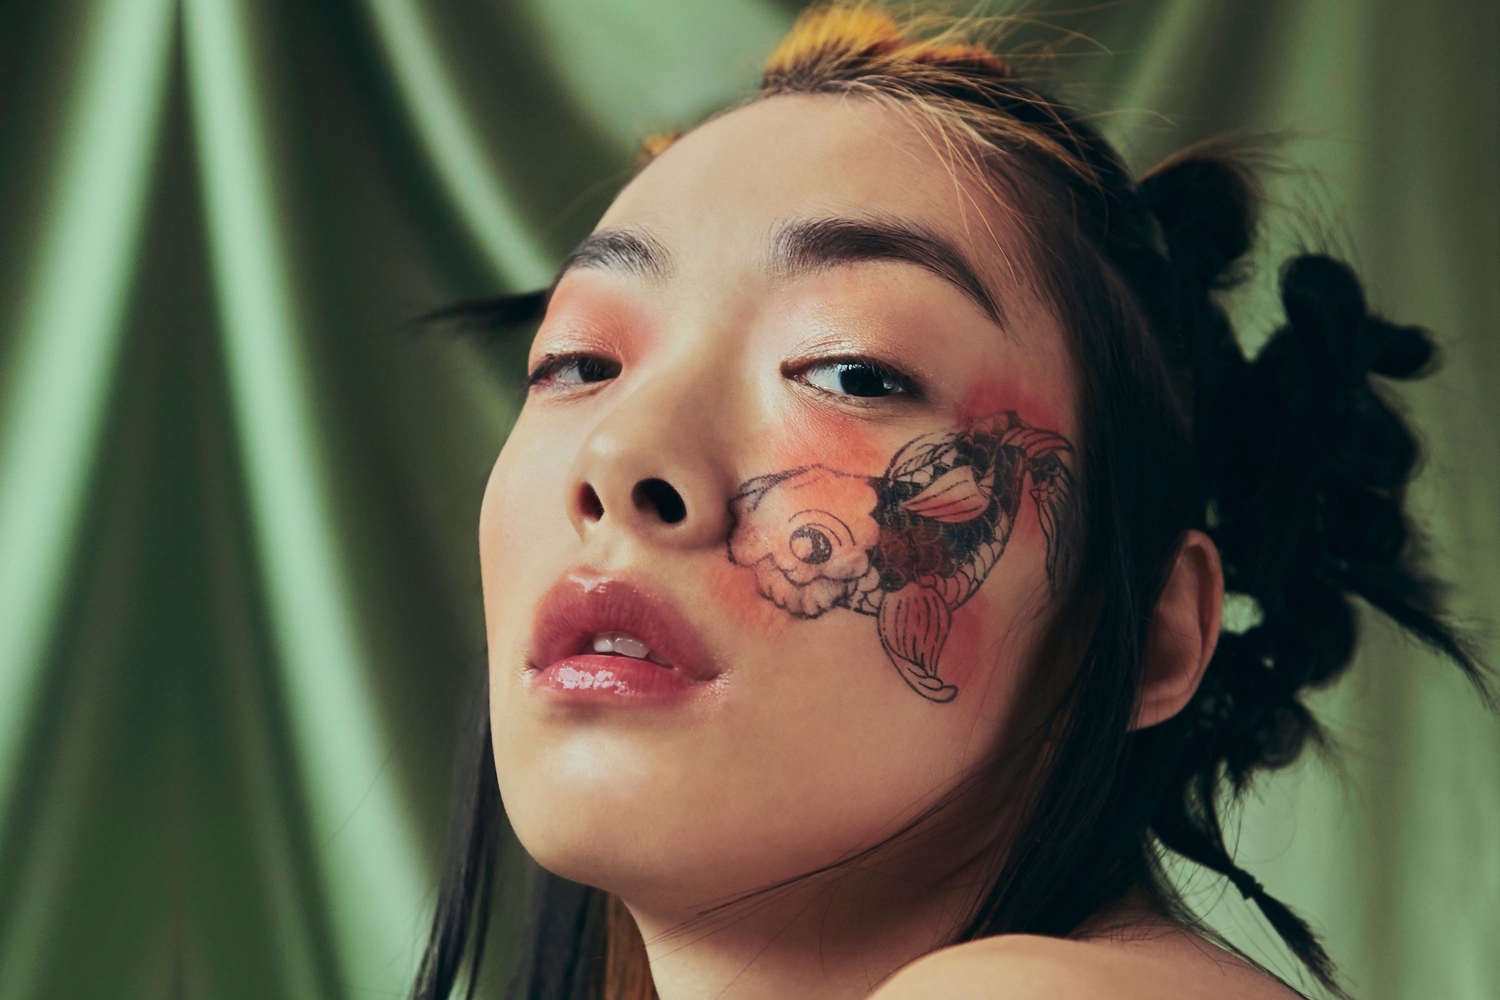 Rina Sawayama is on the cover of DIY’s March 2020 issue